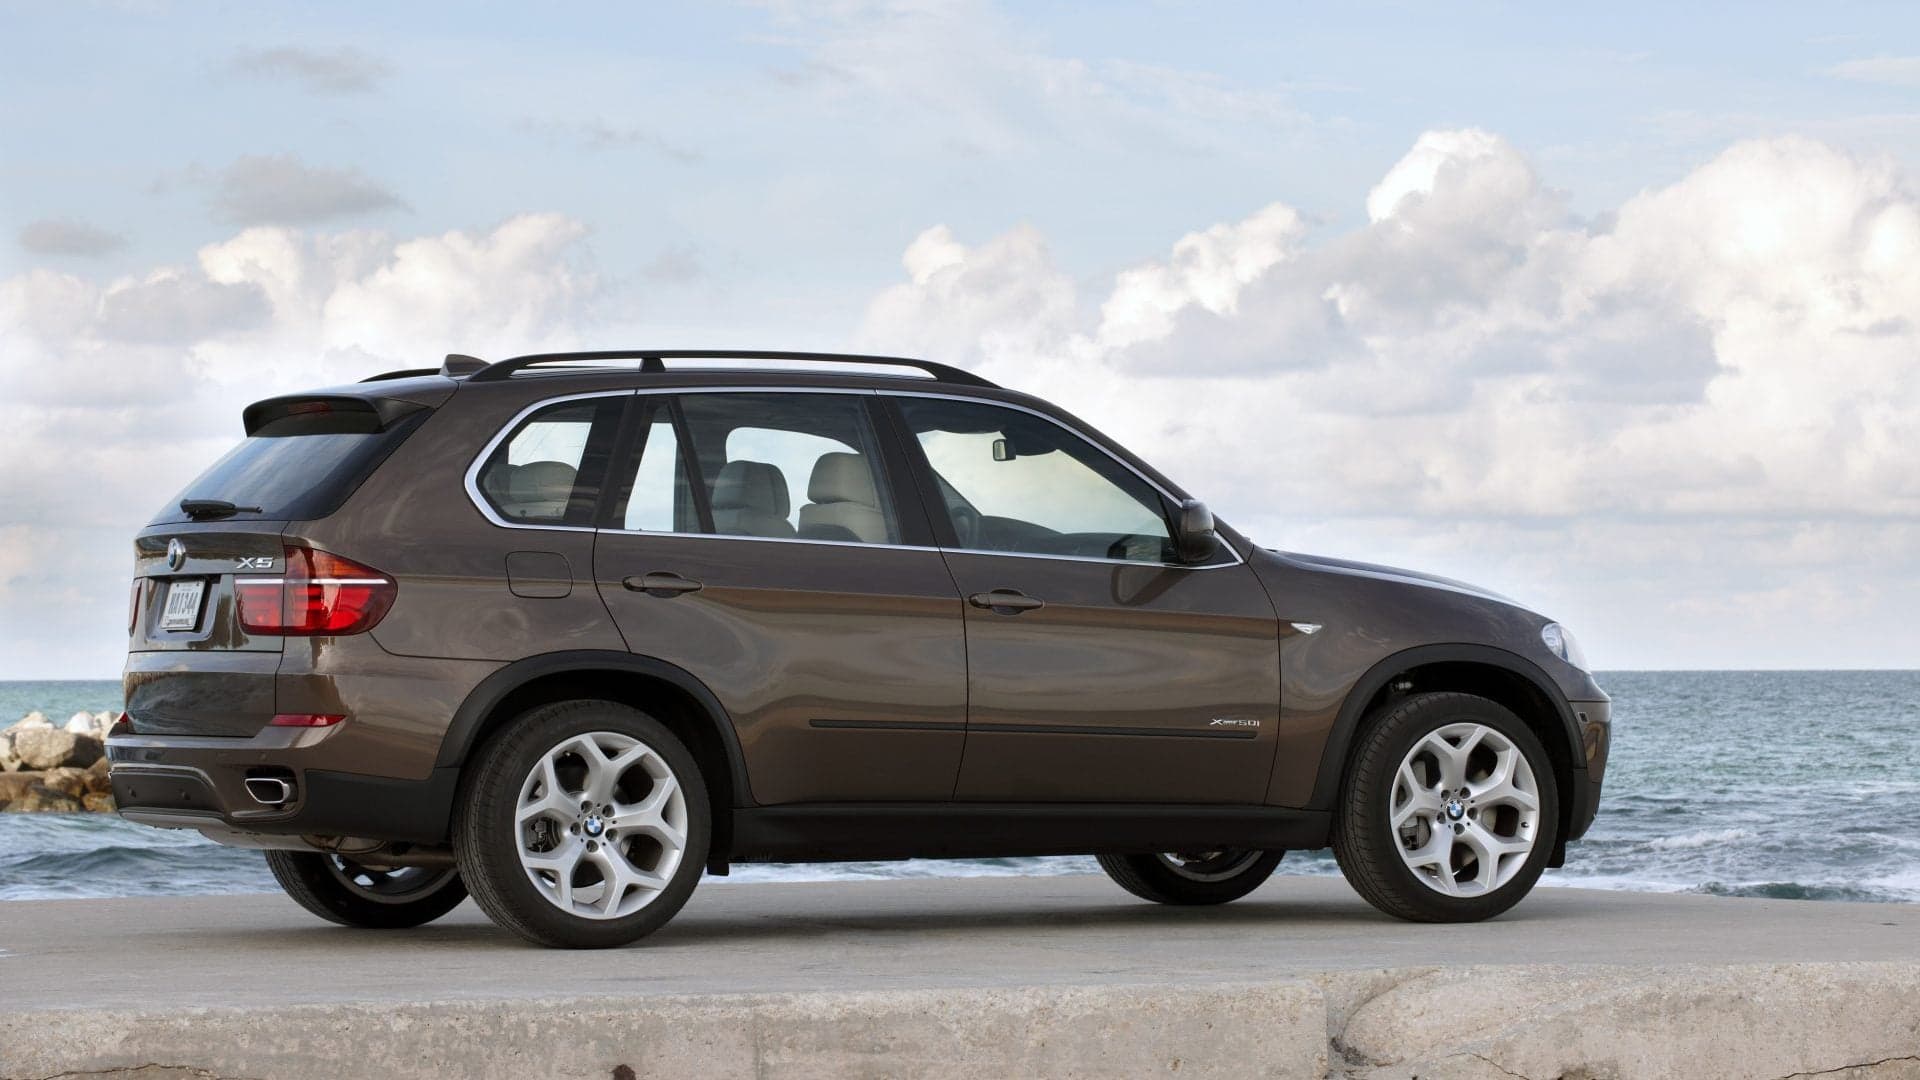 BMW X5 Owner Suing After Thumb Severed by Self-Closing Door